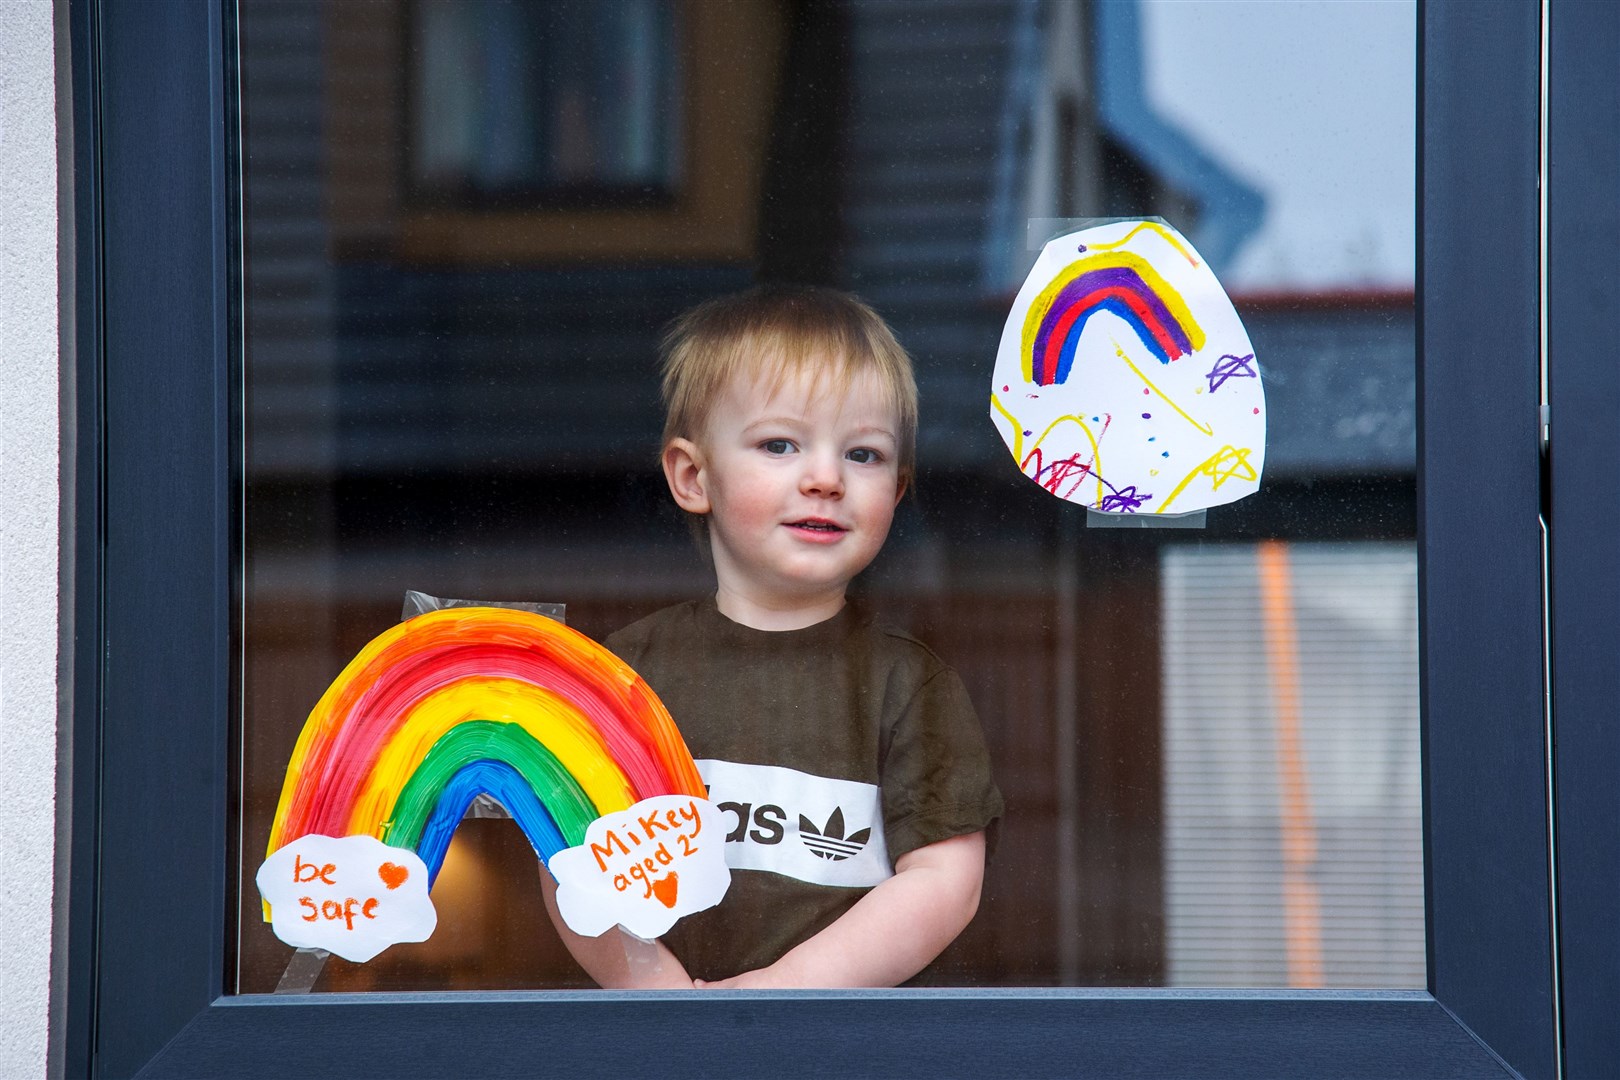 Mikey Gordon alongside his rainbow display...As part of the 'From My Window' movement - people put rainbows in their windows across Moray to spread joy in March. Picture: Daniel Forsyth